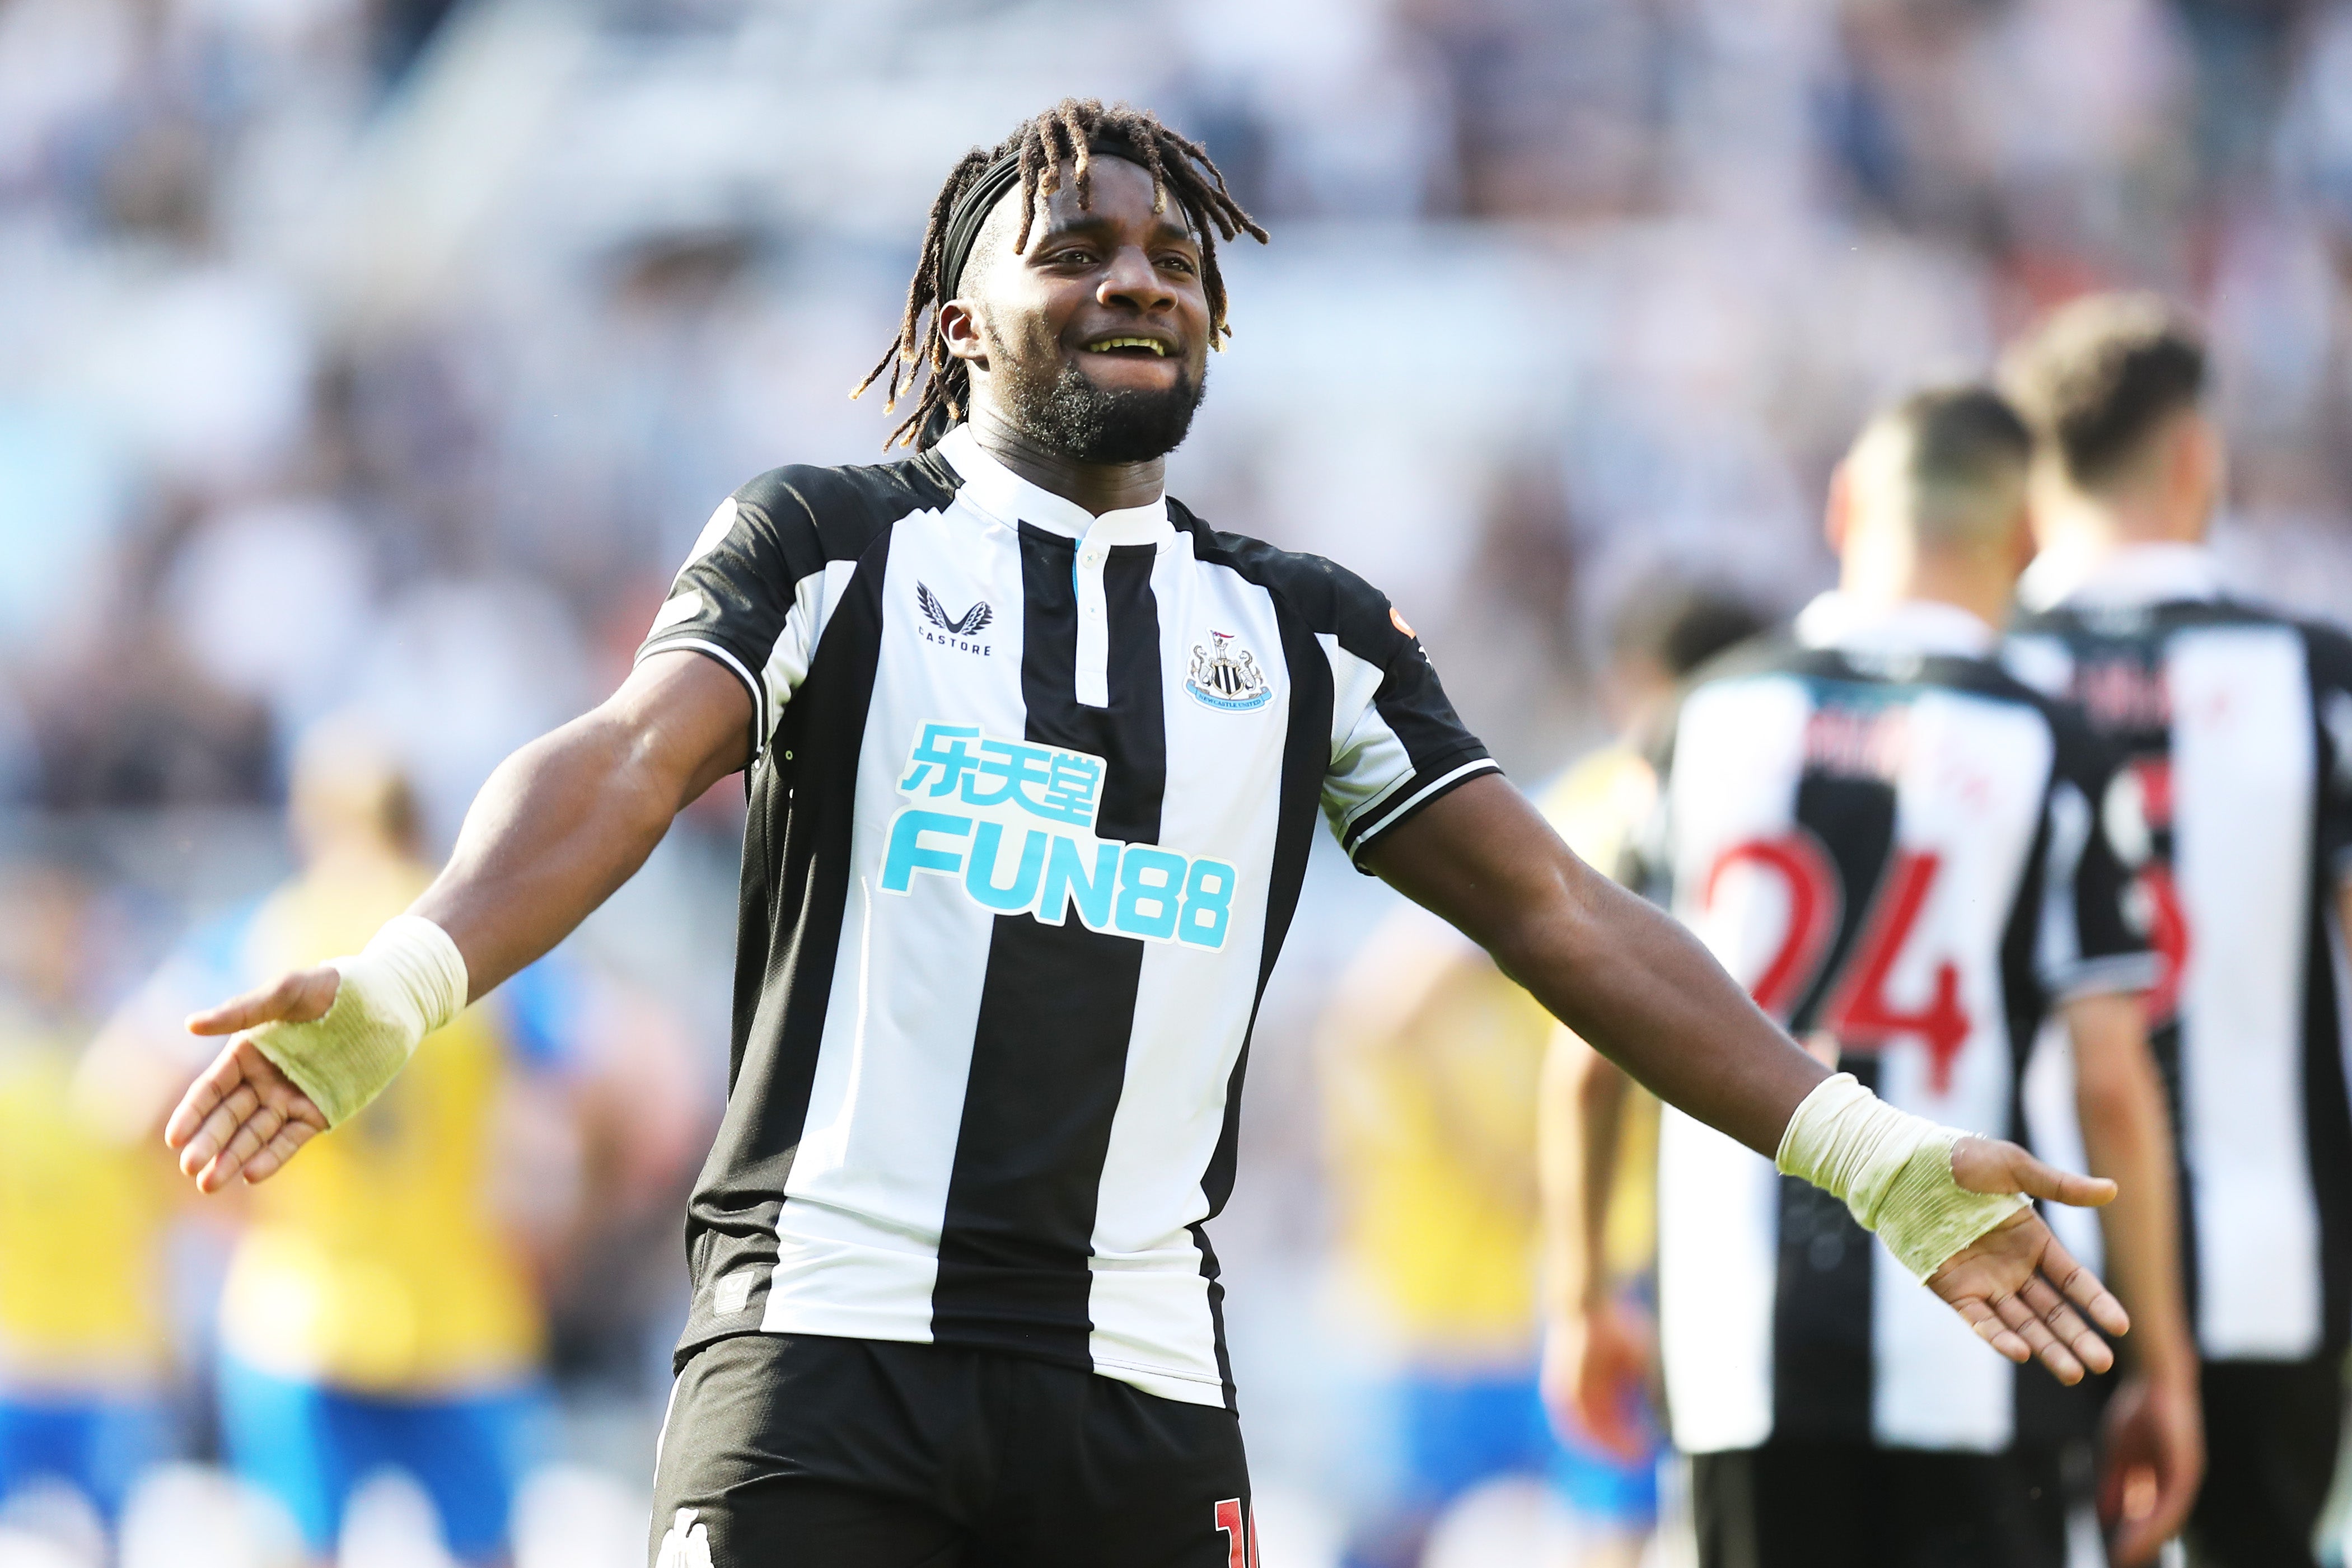 Allan Saint-Maximin will likely lead the line for Newcastle